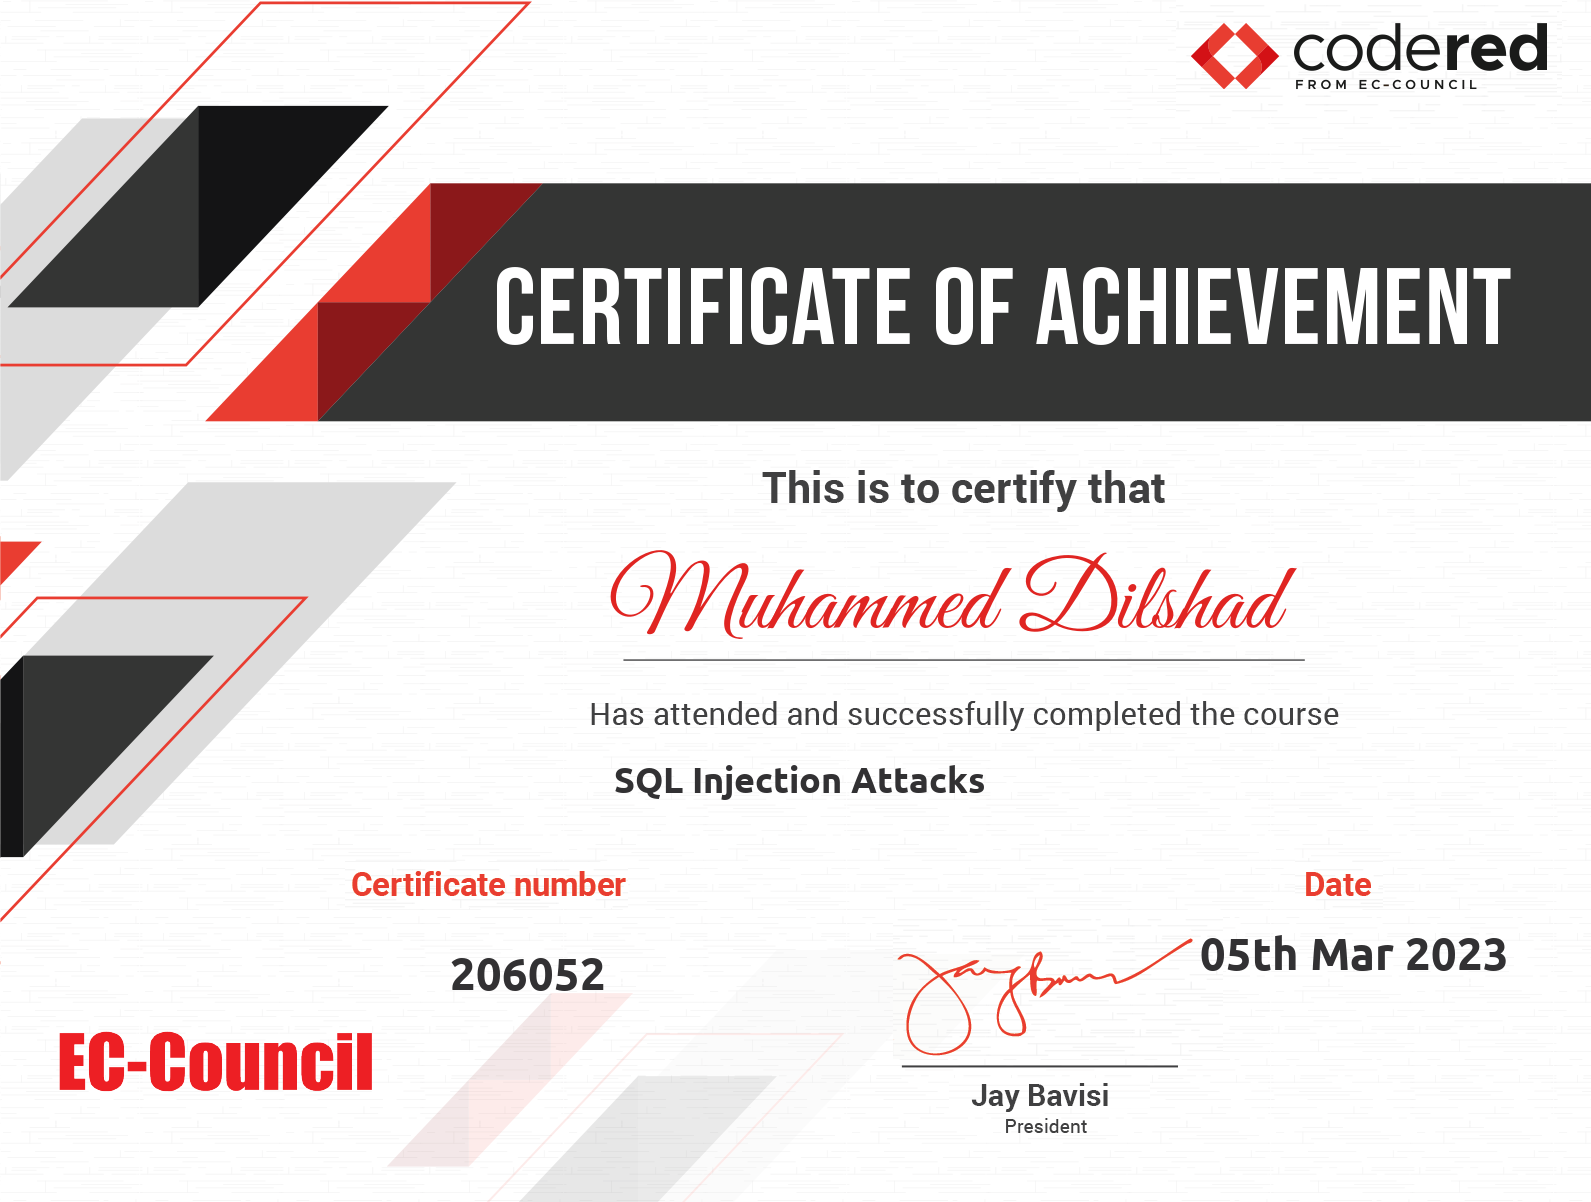 couNciL

> CERTIFICATE OF ACHIEVEMENT

This is to certify that

# O)Nlitemmed Dilstad

Has attended and successfully completed the course
SQL Injection Attacks
Certificate number Date

206052 SE Mar 2023

Jay Bavisi

President